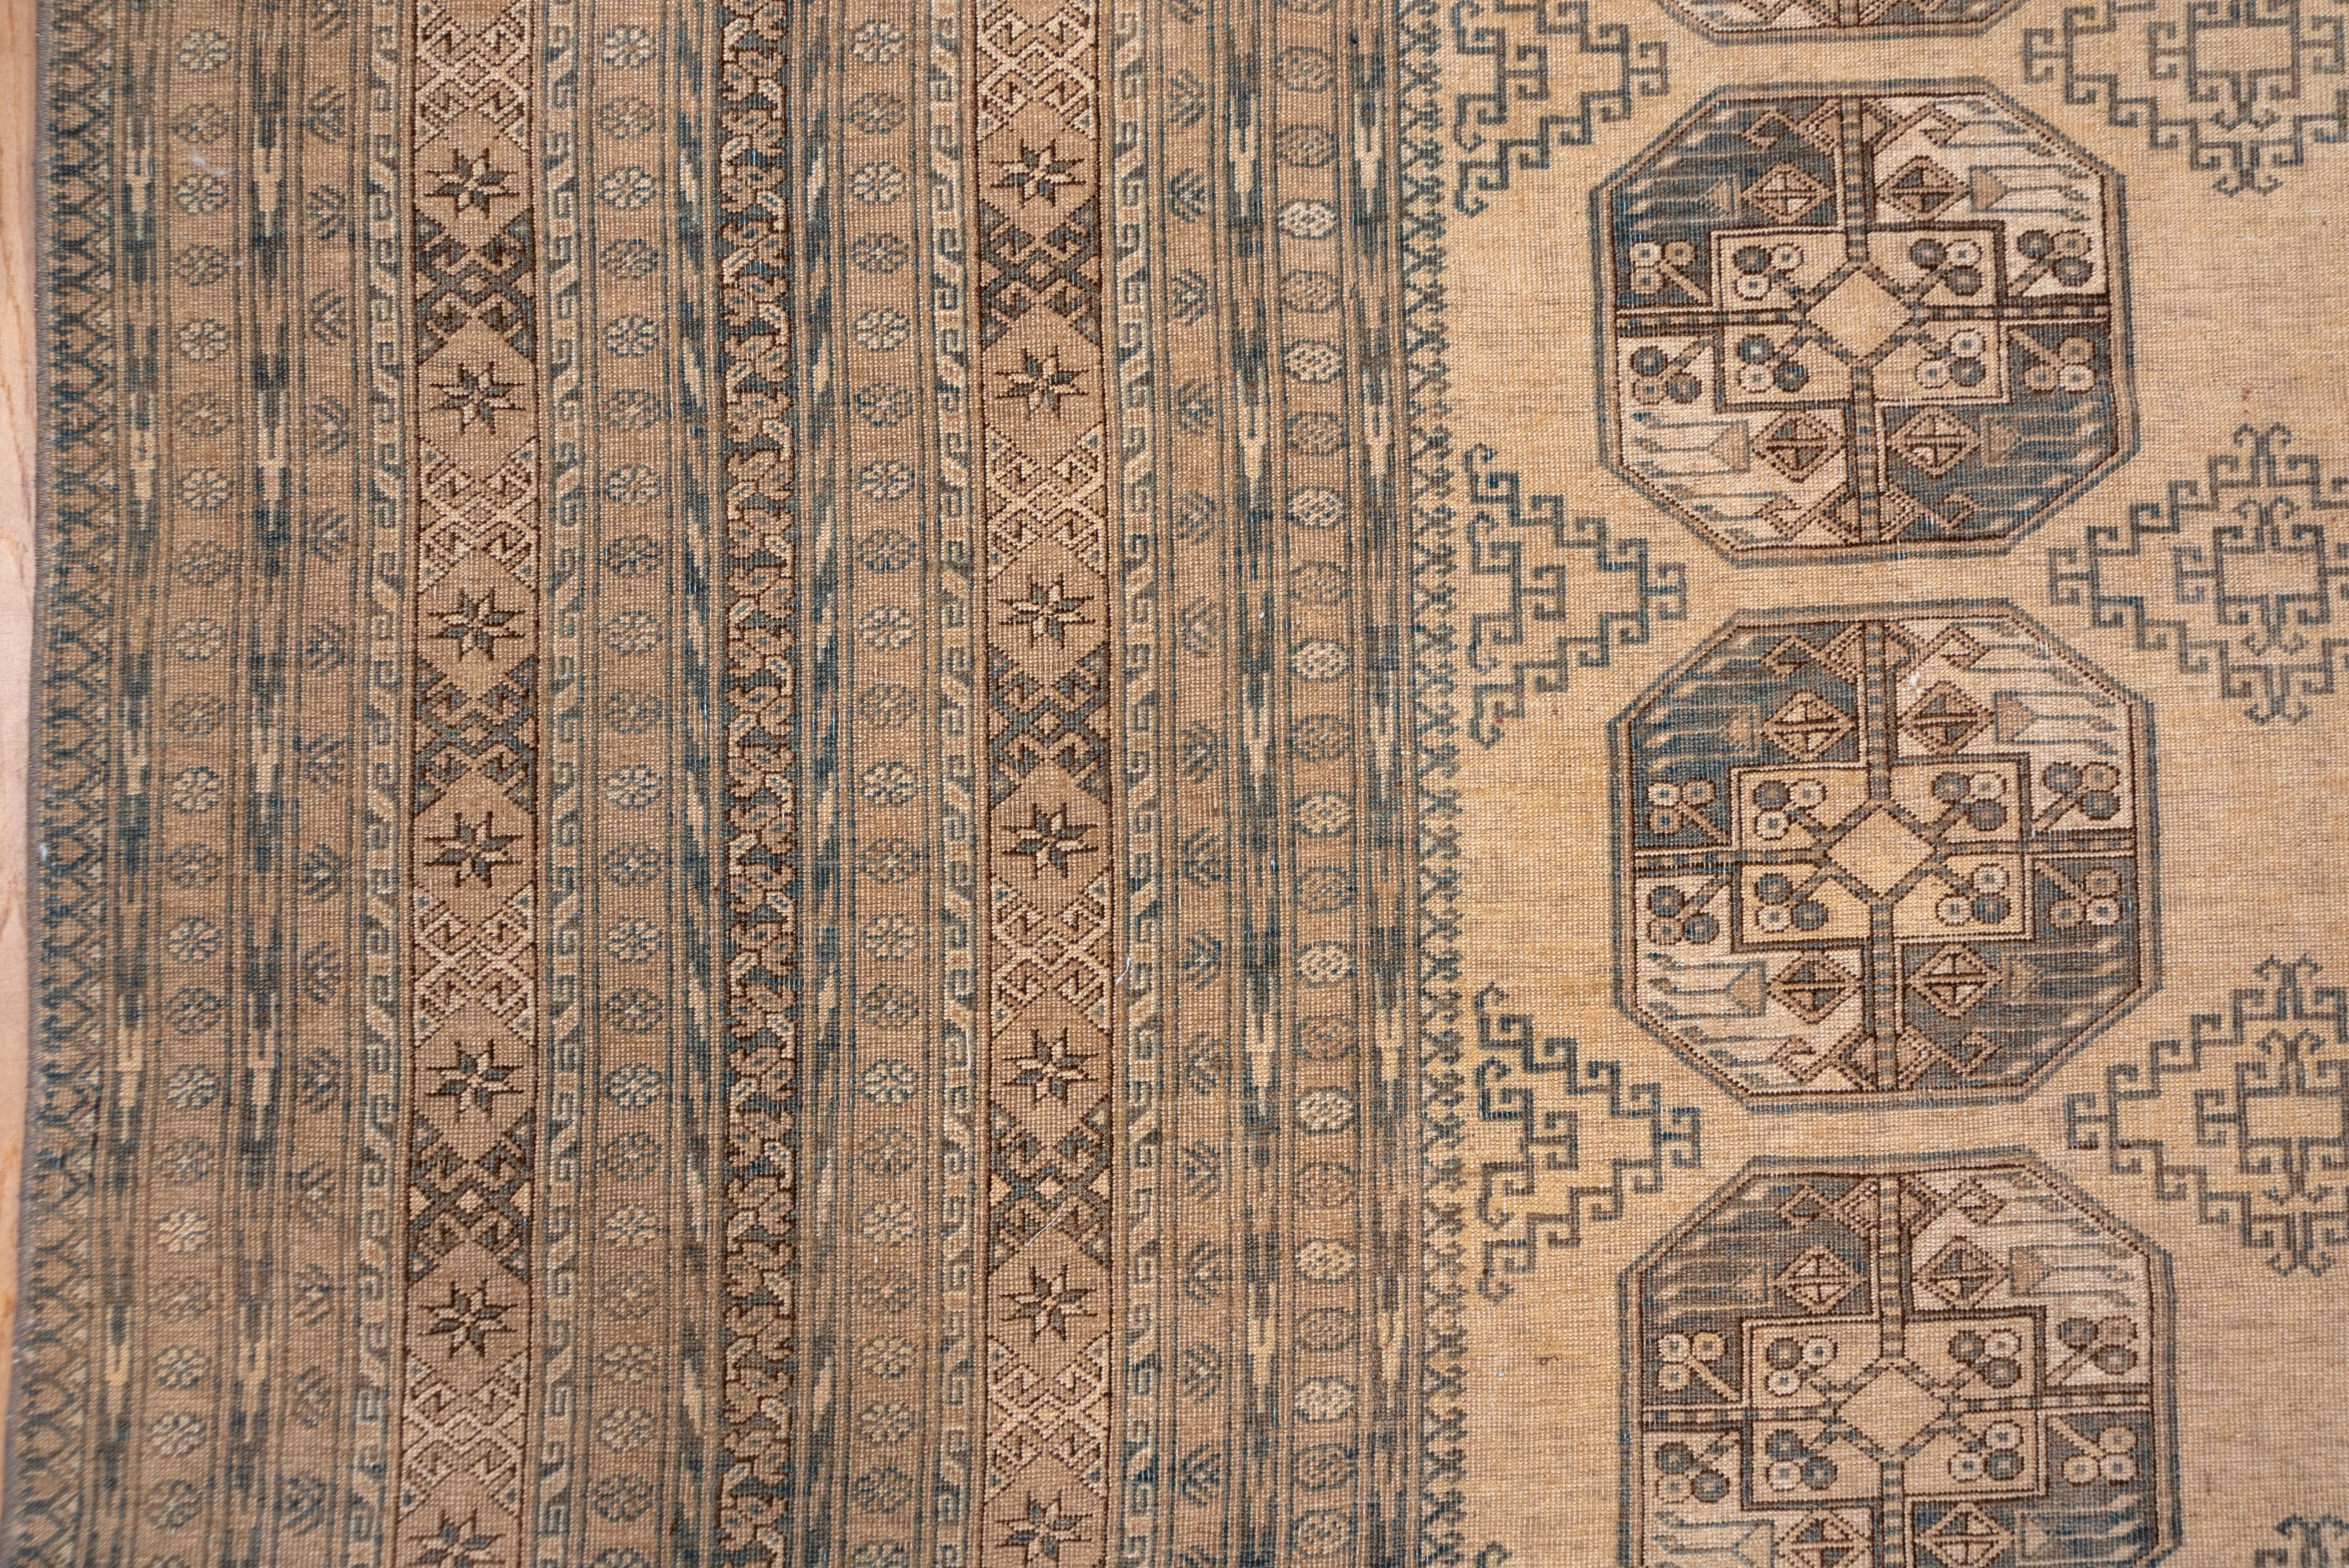 Three columns of quartered octagonal Ersari Turkmen guls with smaller lozenge-form hooked minor guls are evenly placed on the tan field while a highly complex frame composed of over a dozen patterned stripes frames the composition. Cool double